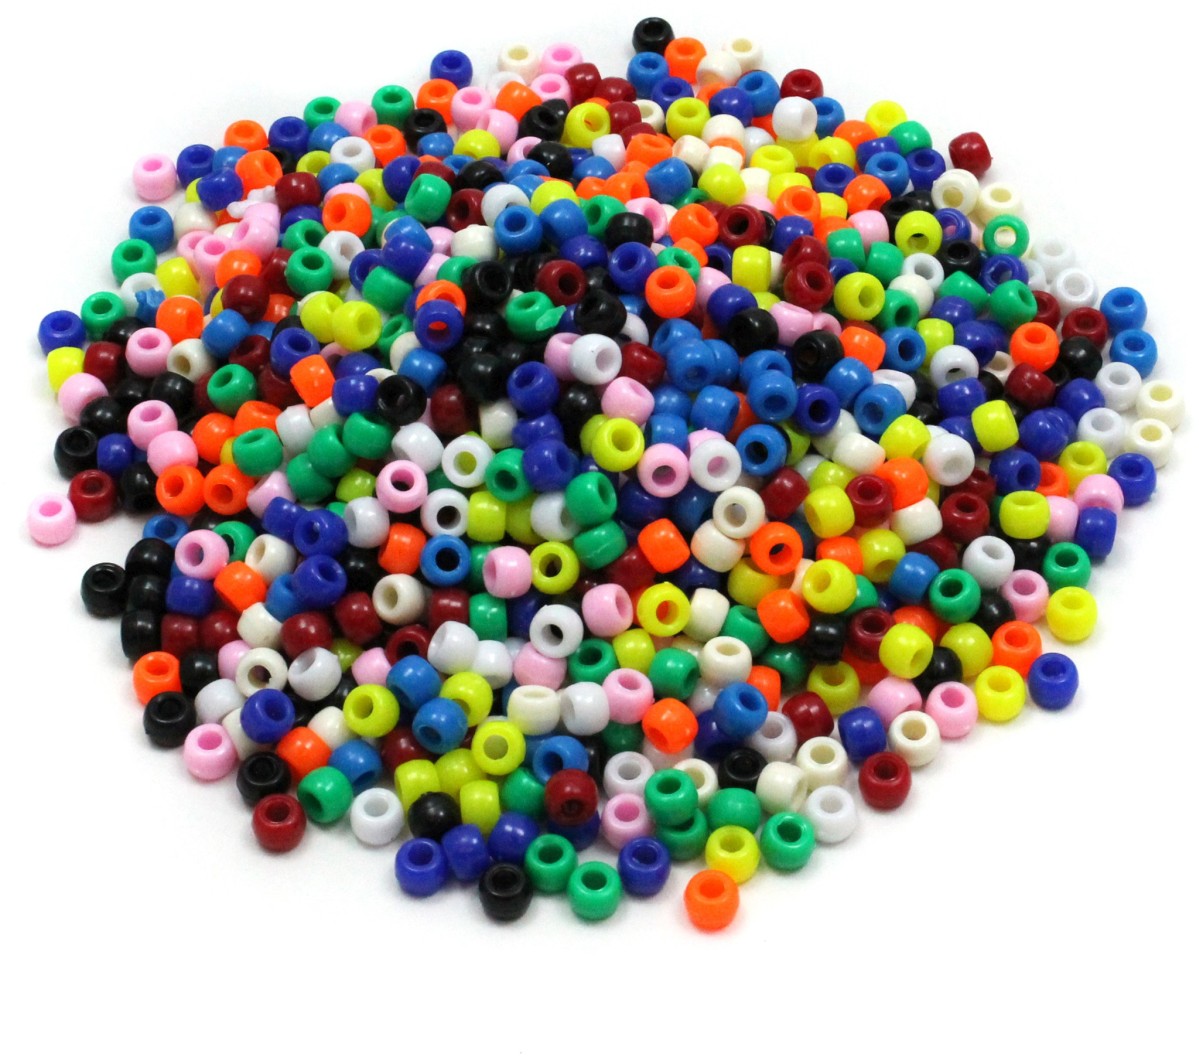 Picture of Dixon Ticonderoga CK-3552-3 Bright Hues Pony Beads - 3 Each